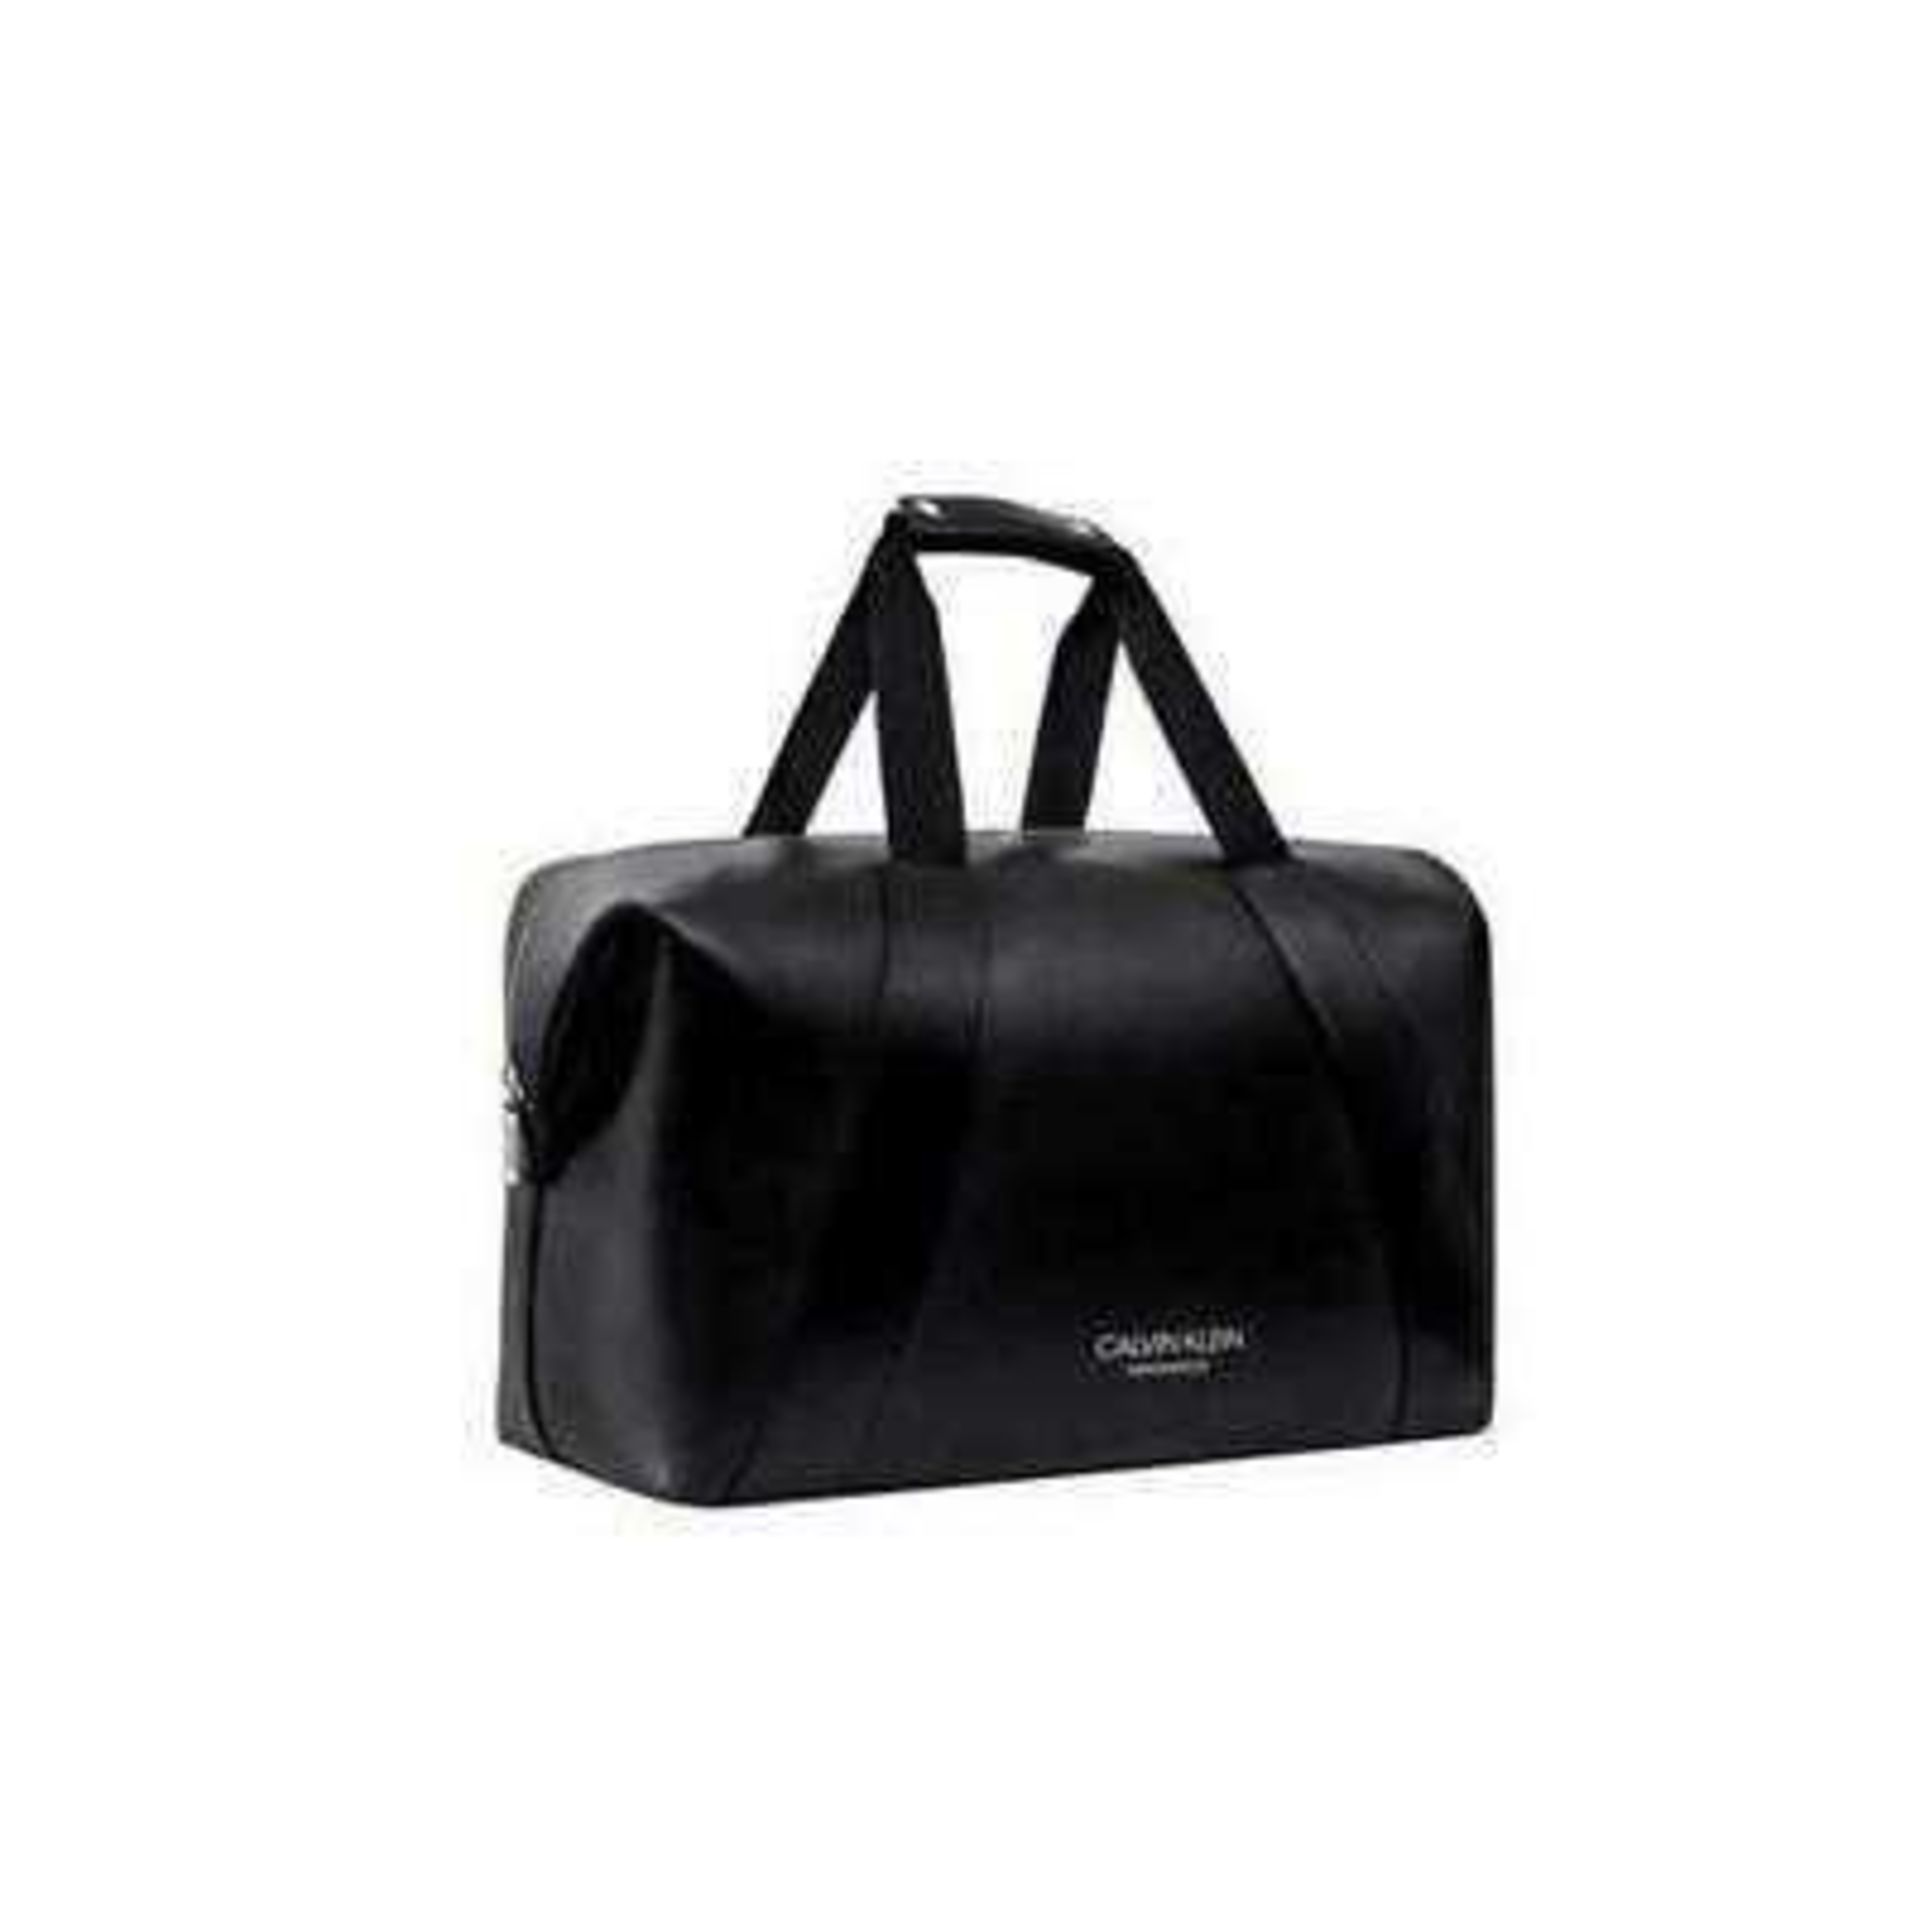 RRP £75 Brand New Bagged And Sealed With Tags Calvin Klein Fragrances Black Unisex Duffle Bag